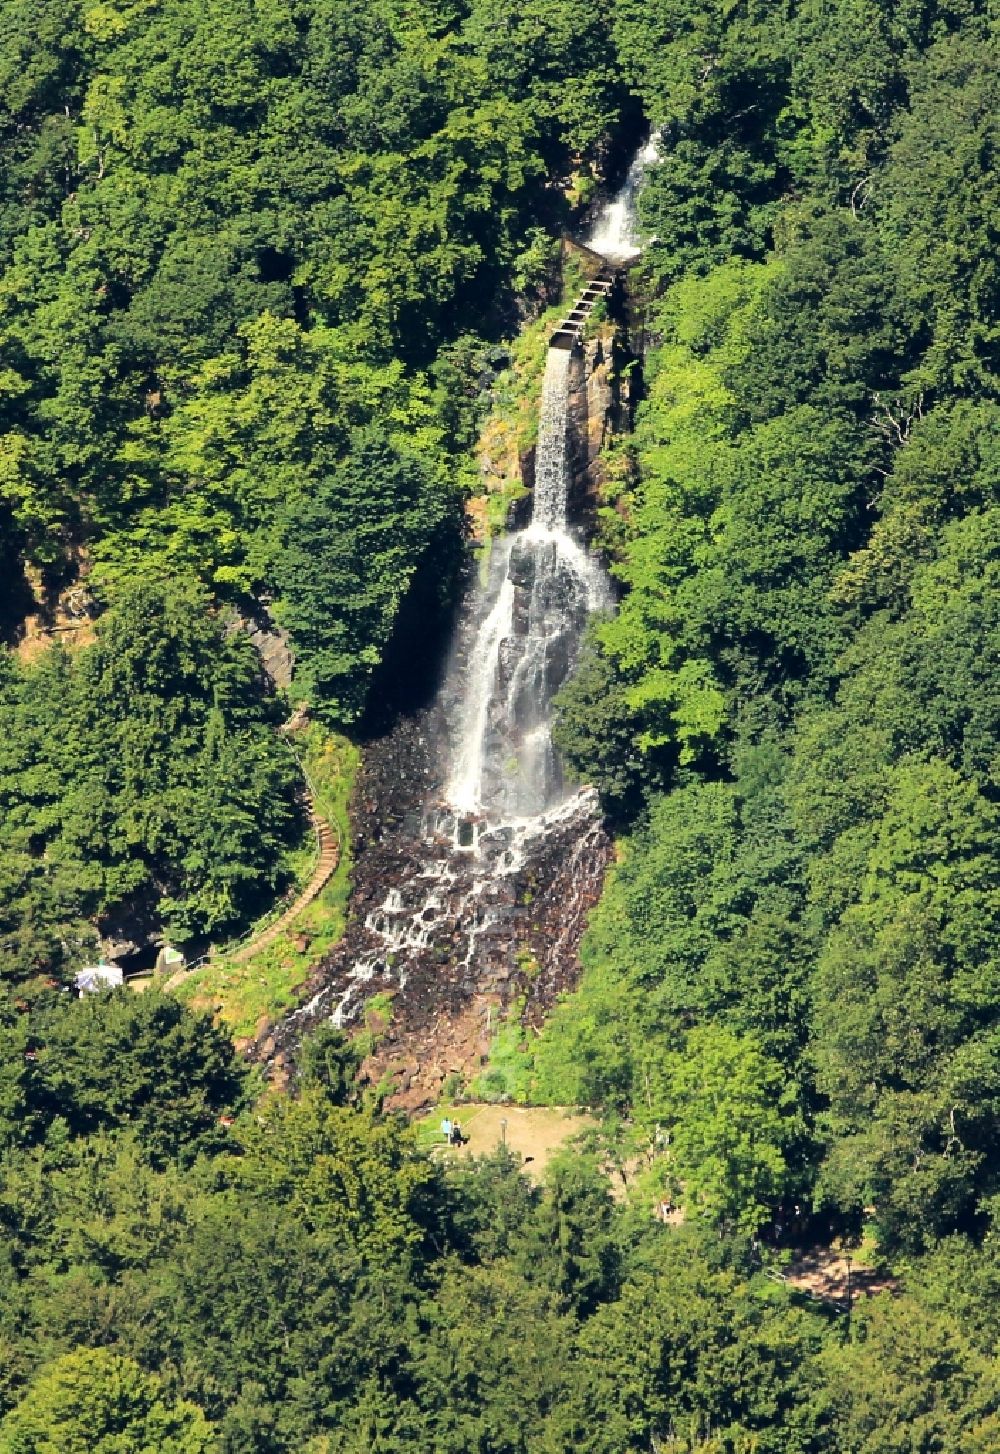 Brotterode - Trusetal from above - Trusetaler Waterfall at Brotterode in Thuringia